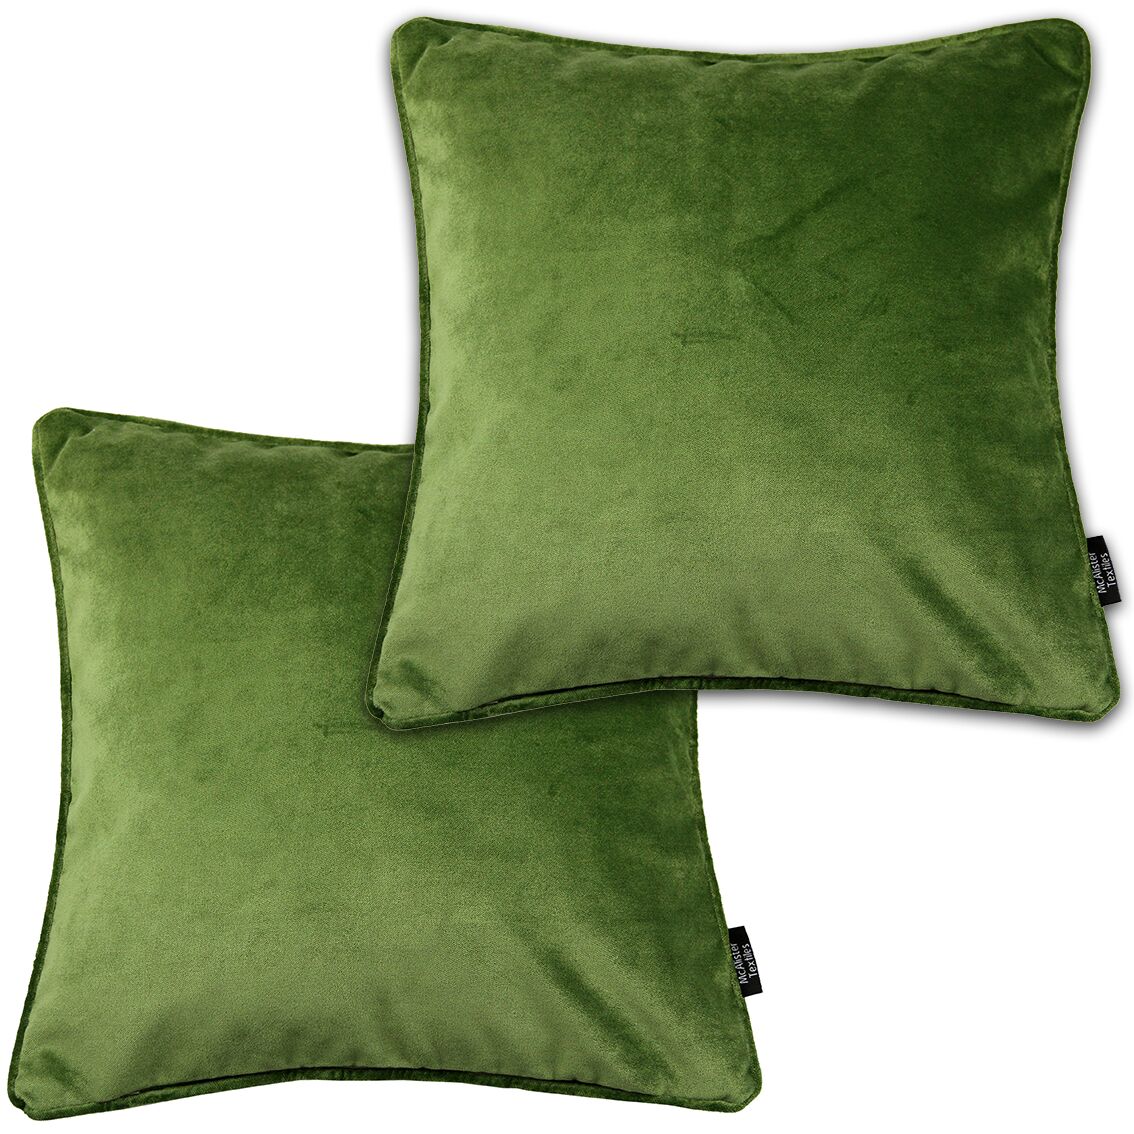 McAlister Textiles Matt Fern Green Velvet 43cm x 43cm Piped Cushion Sets Cushions and Covers Cushion Covers Set of 2 